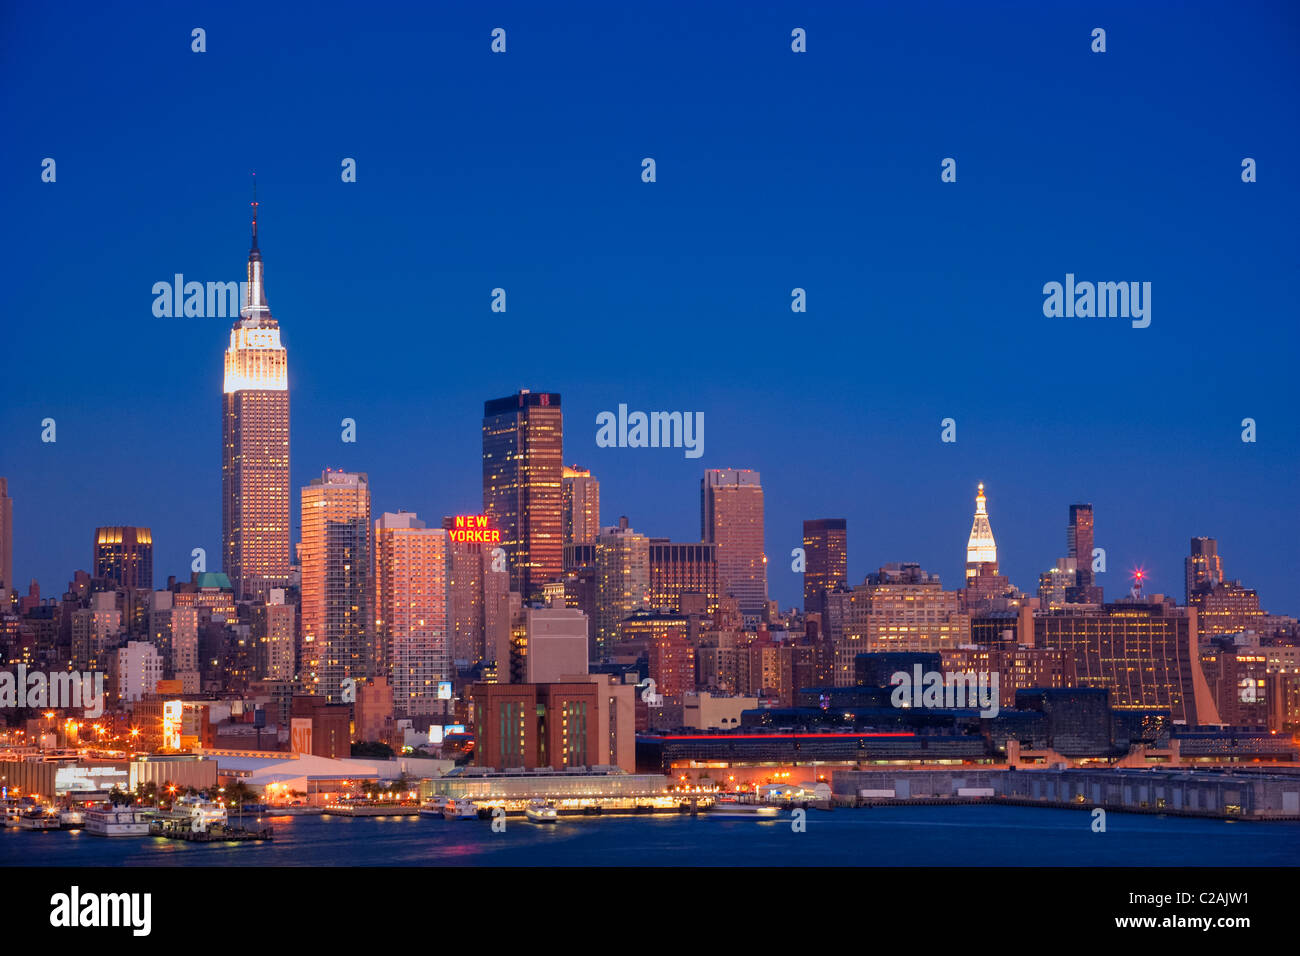 Empire State Building in the Midtown skyline, New York Stock Photo